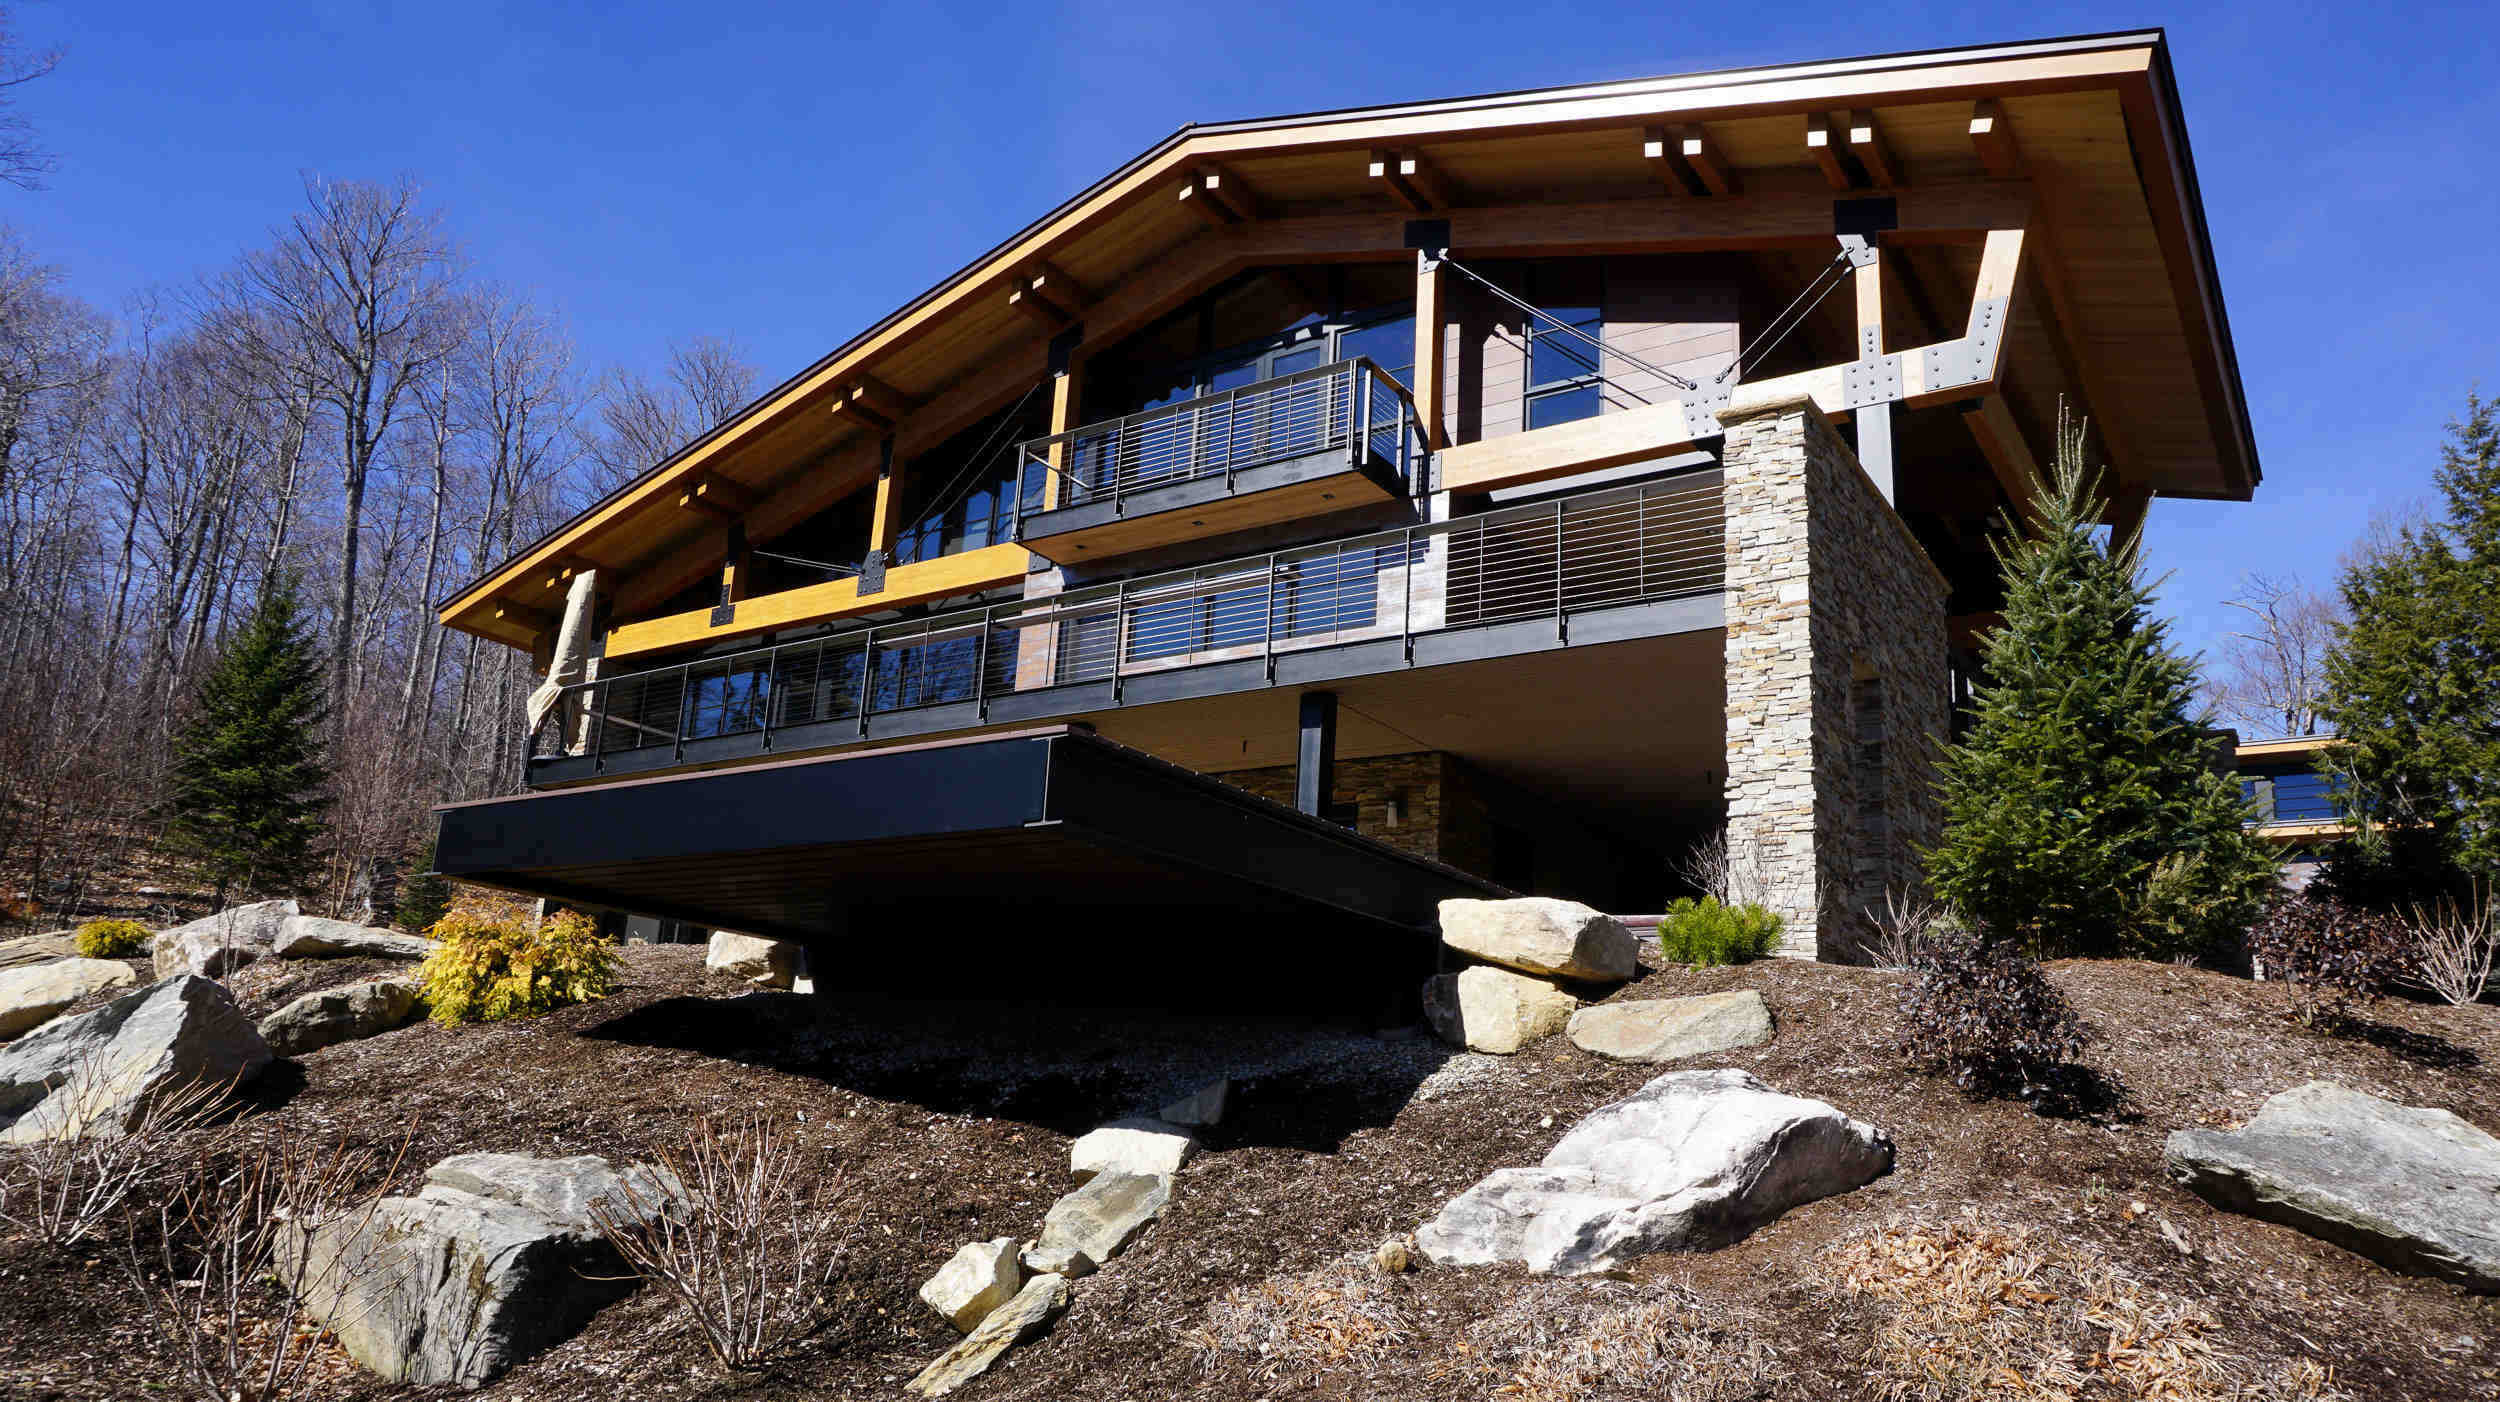 Vermont timber frame home with cable railing system